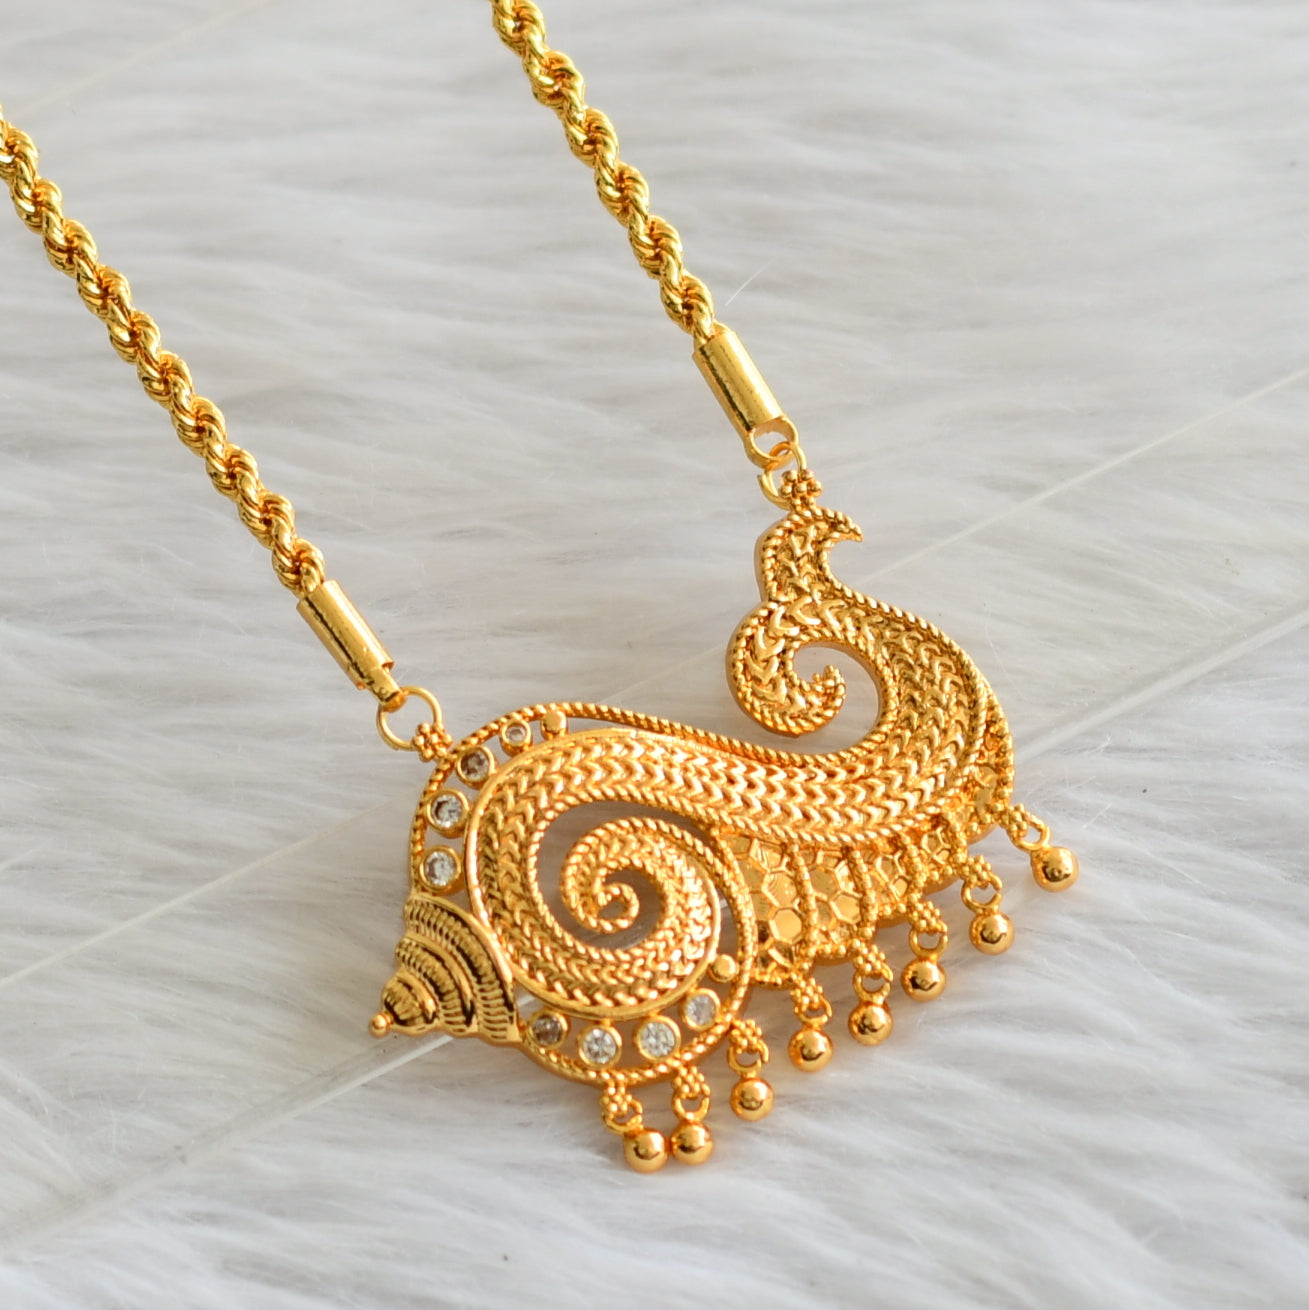 Gold tone 24 inches chain with white shanku pendant dj-44940